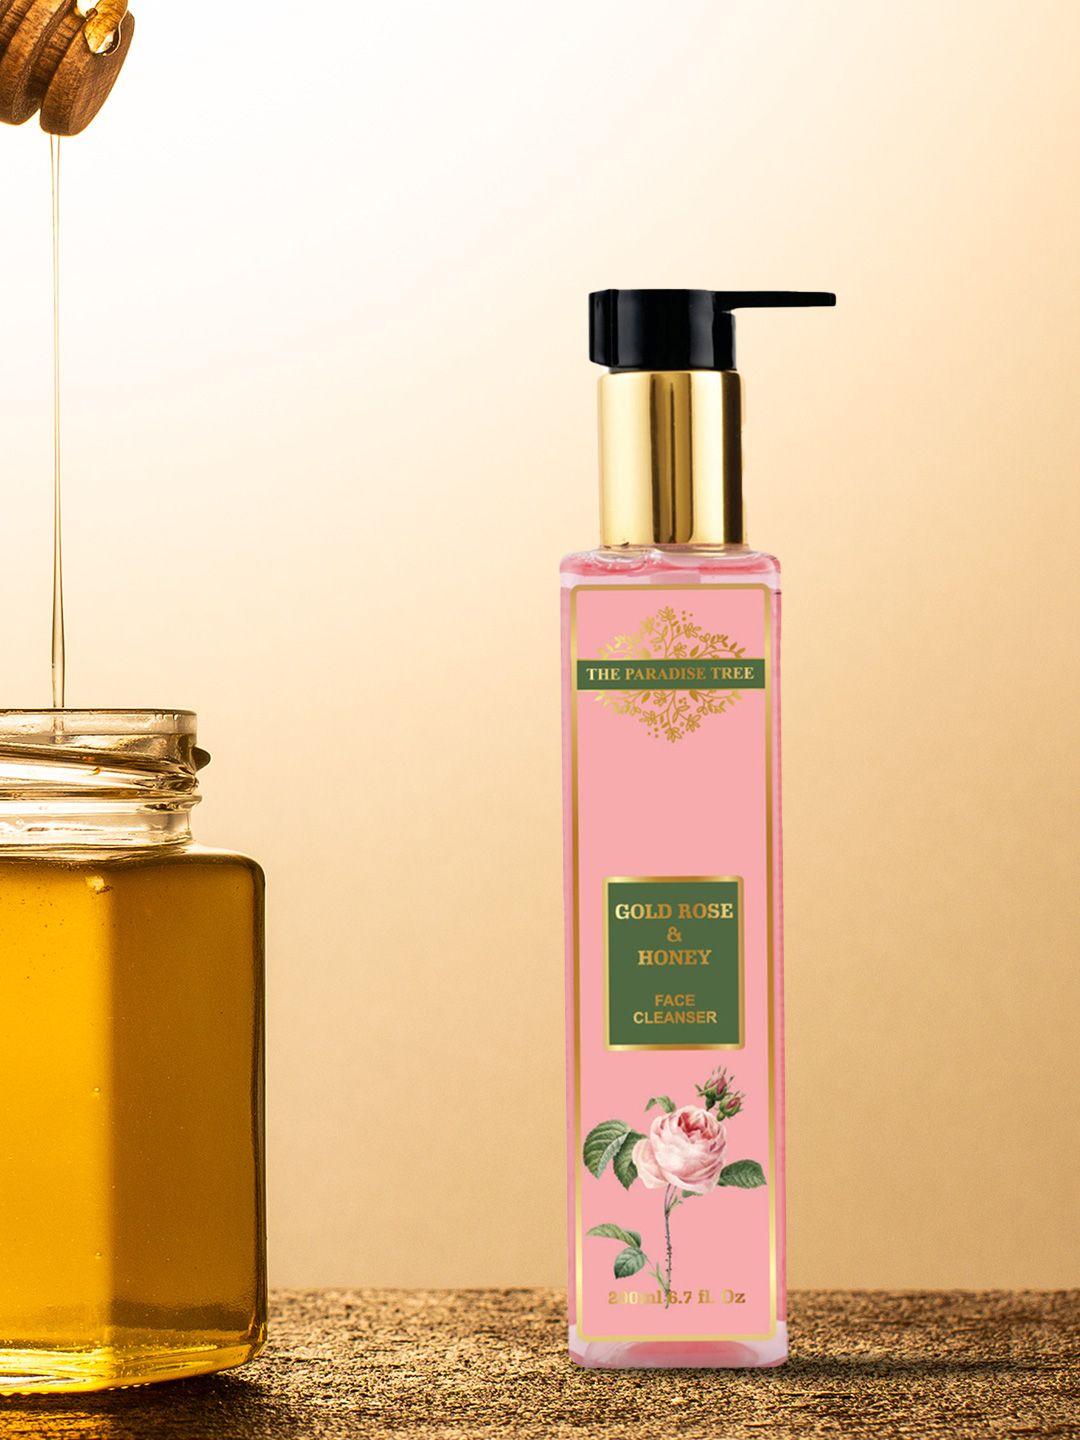 the paradise tree's pink & gold rose and honey face cleanser 200ml